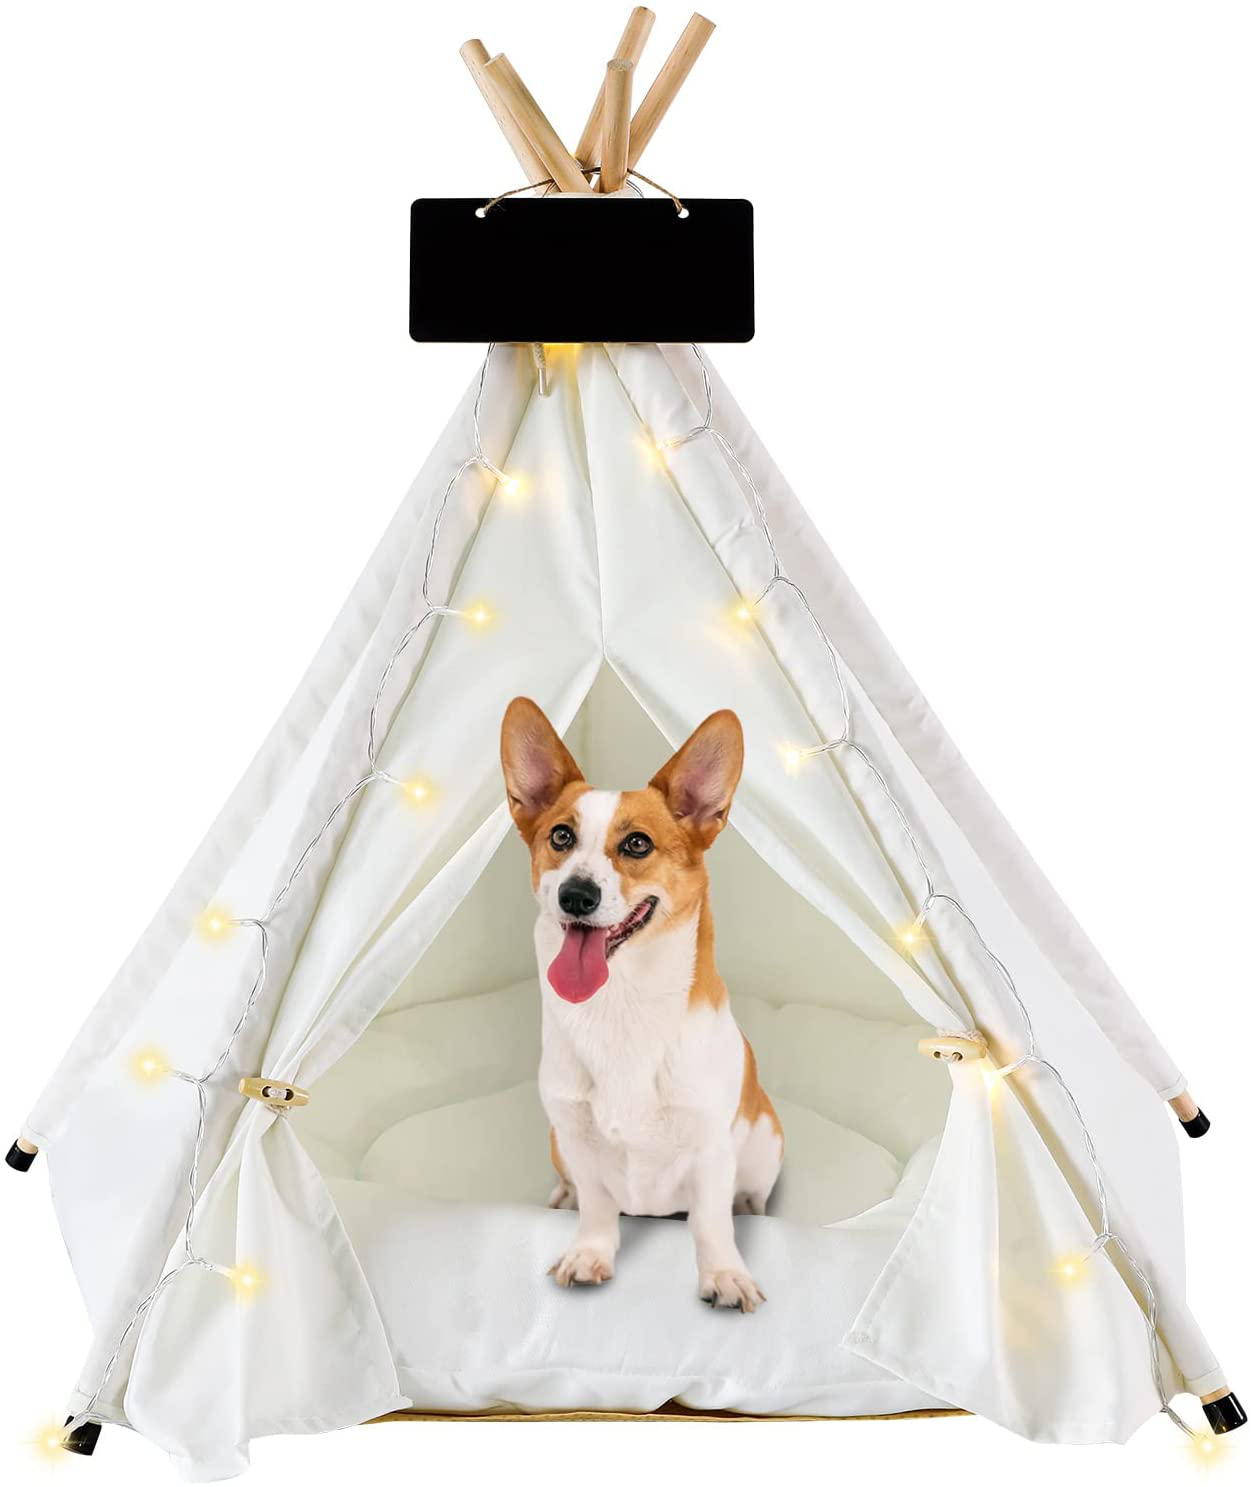 ECO-WILL Pet Teepee Pet Tent with Cushion Portable Puppy Bed for Small Dogs and Cats Folding Dogs House with LED Light String for Indoor and Outdoor,Christmas,24Inches